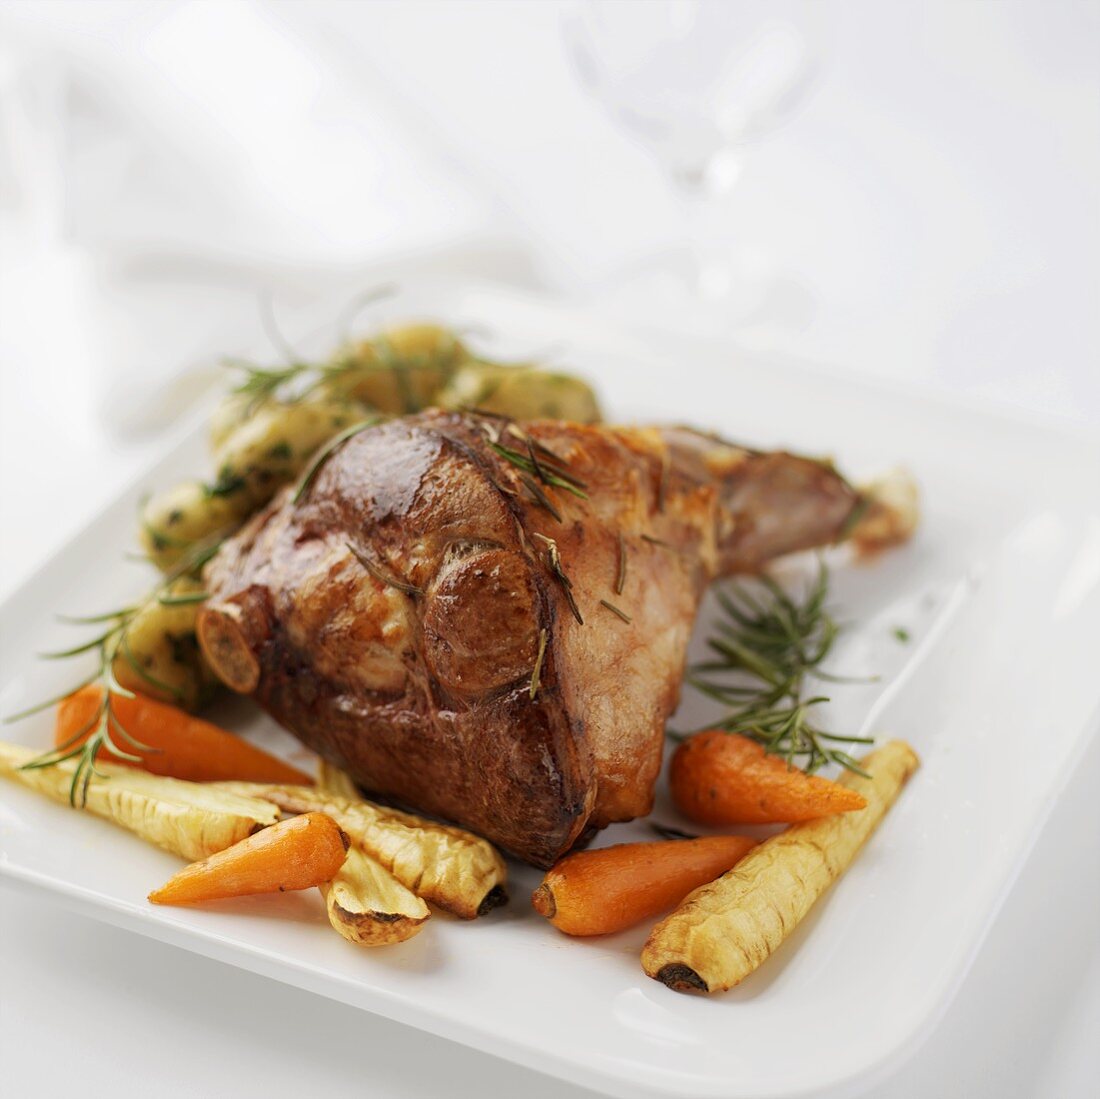 Roasted leg of lamb with rosemary and root vegetables